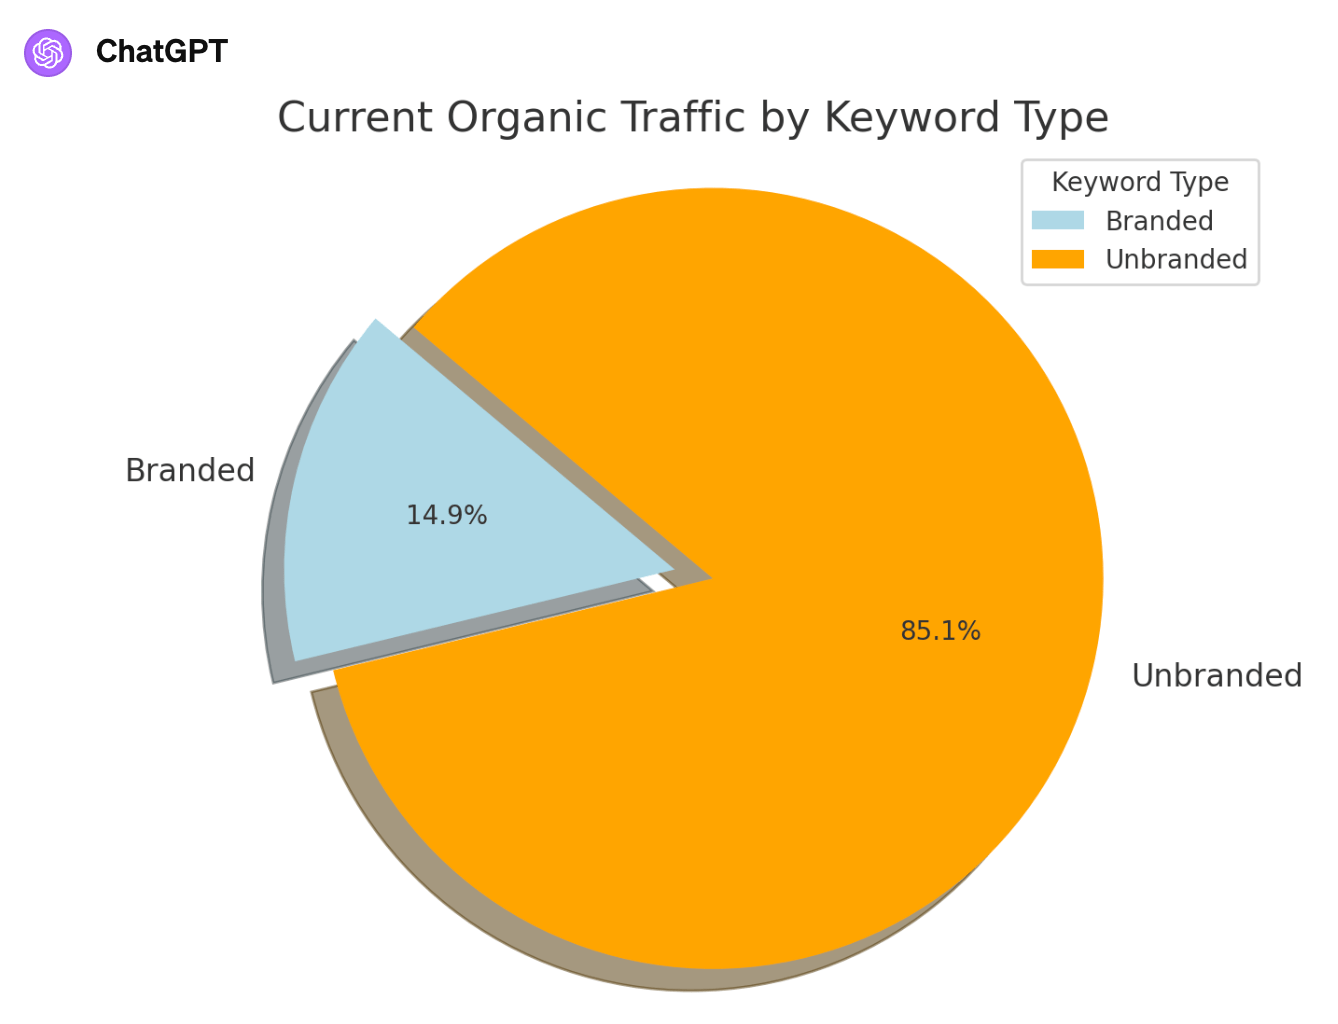 Generated pie chart for branded vs unbranded keywords